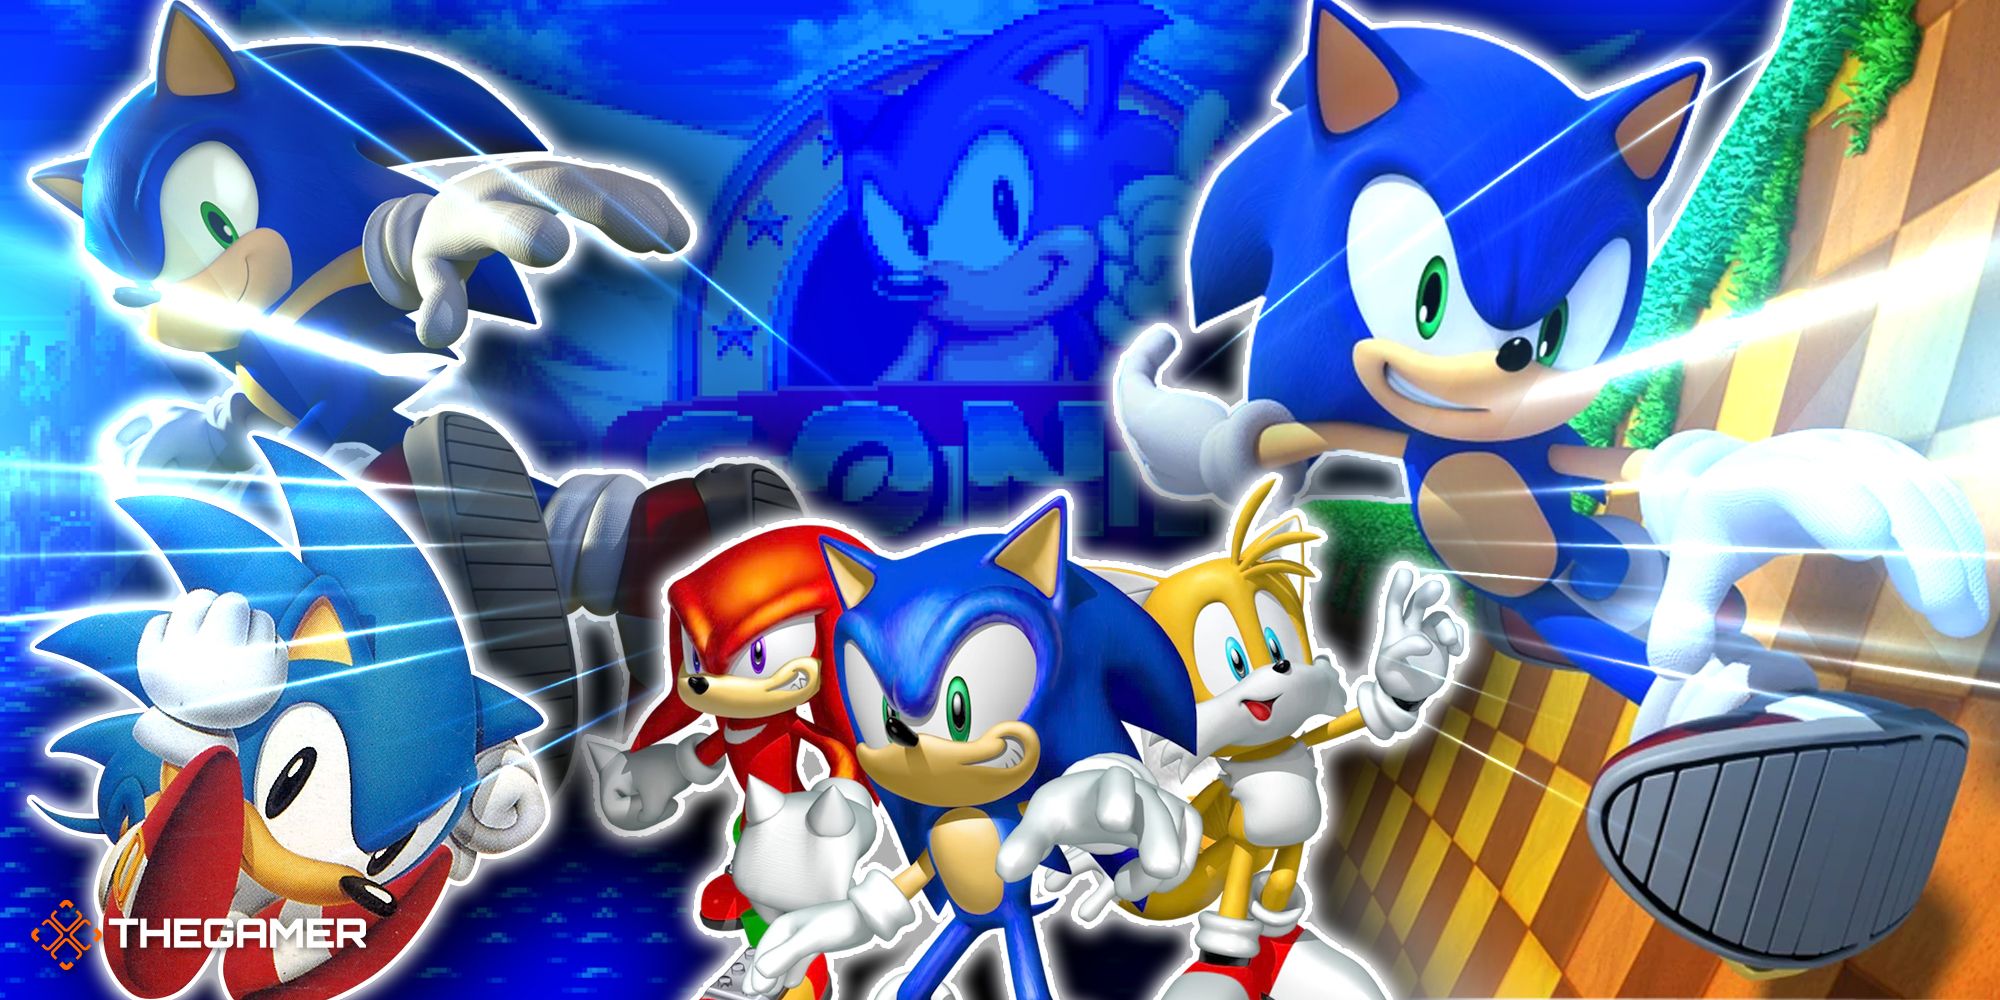 Game art from Sonic The Hedgehog, Sonic Heroes, Sonic Lost World and Sonic Frontiers.